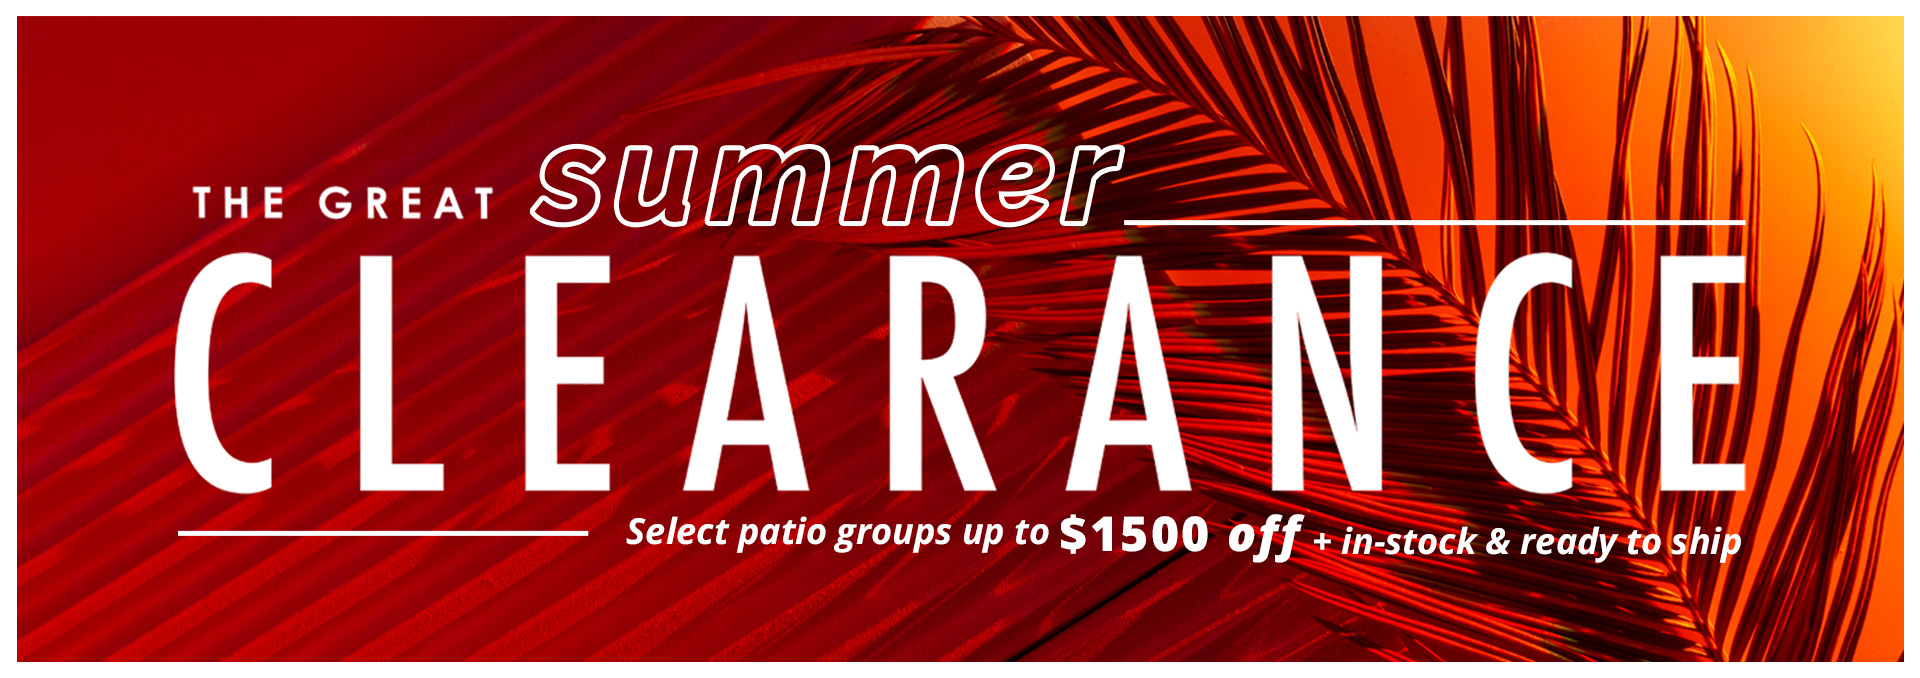 The Great Summer Clearance: select patio groups up to $1500 off at your local store